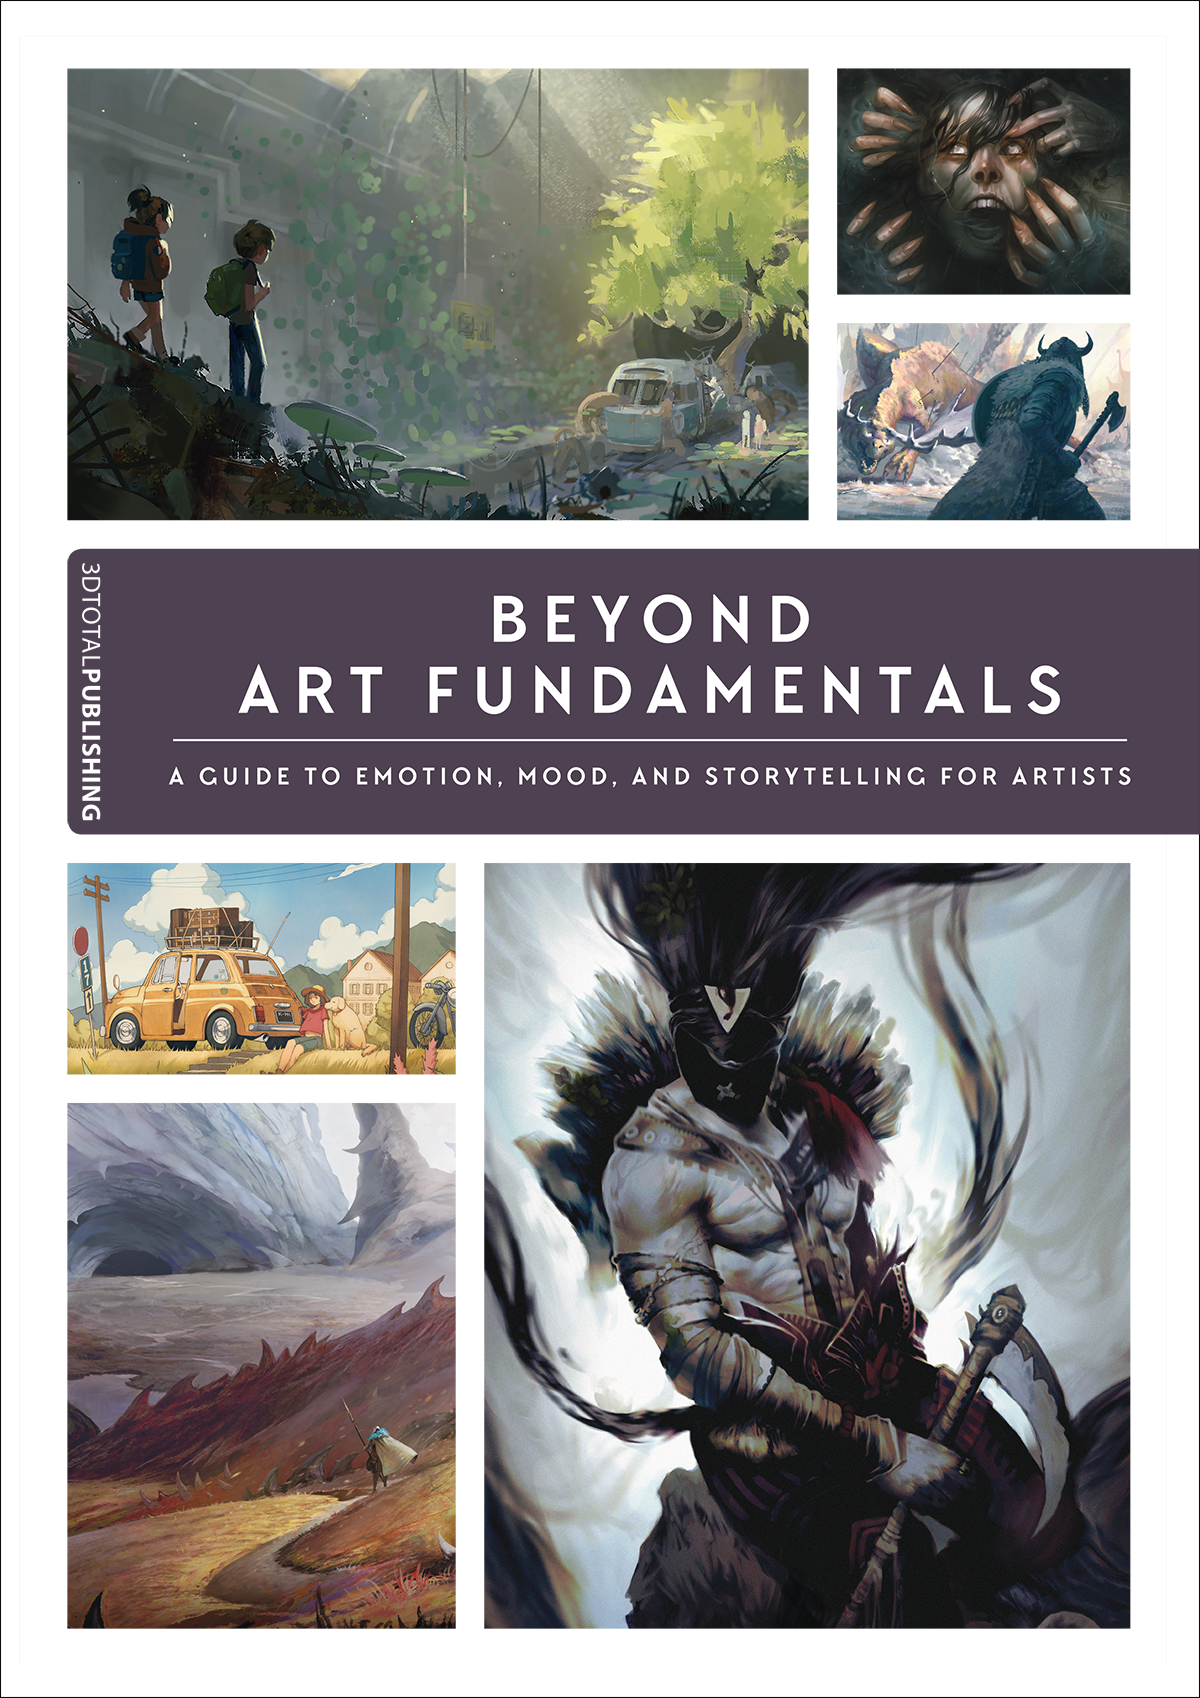 Cover of 'Beyond Art Fundamentals' book, showing a collage of digital artwork, including sci-fi scenes and future landscapes.